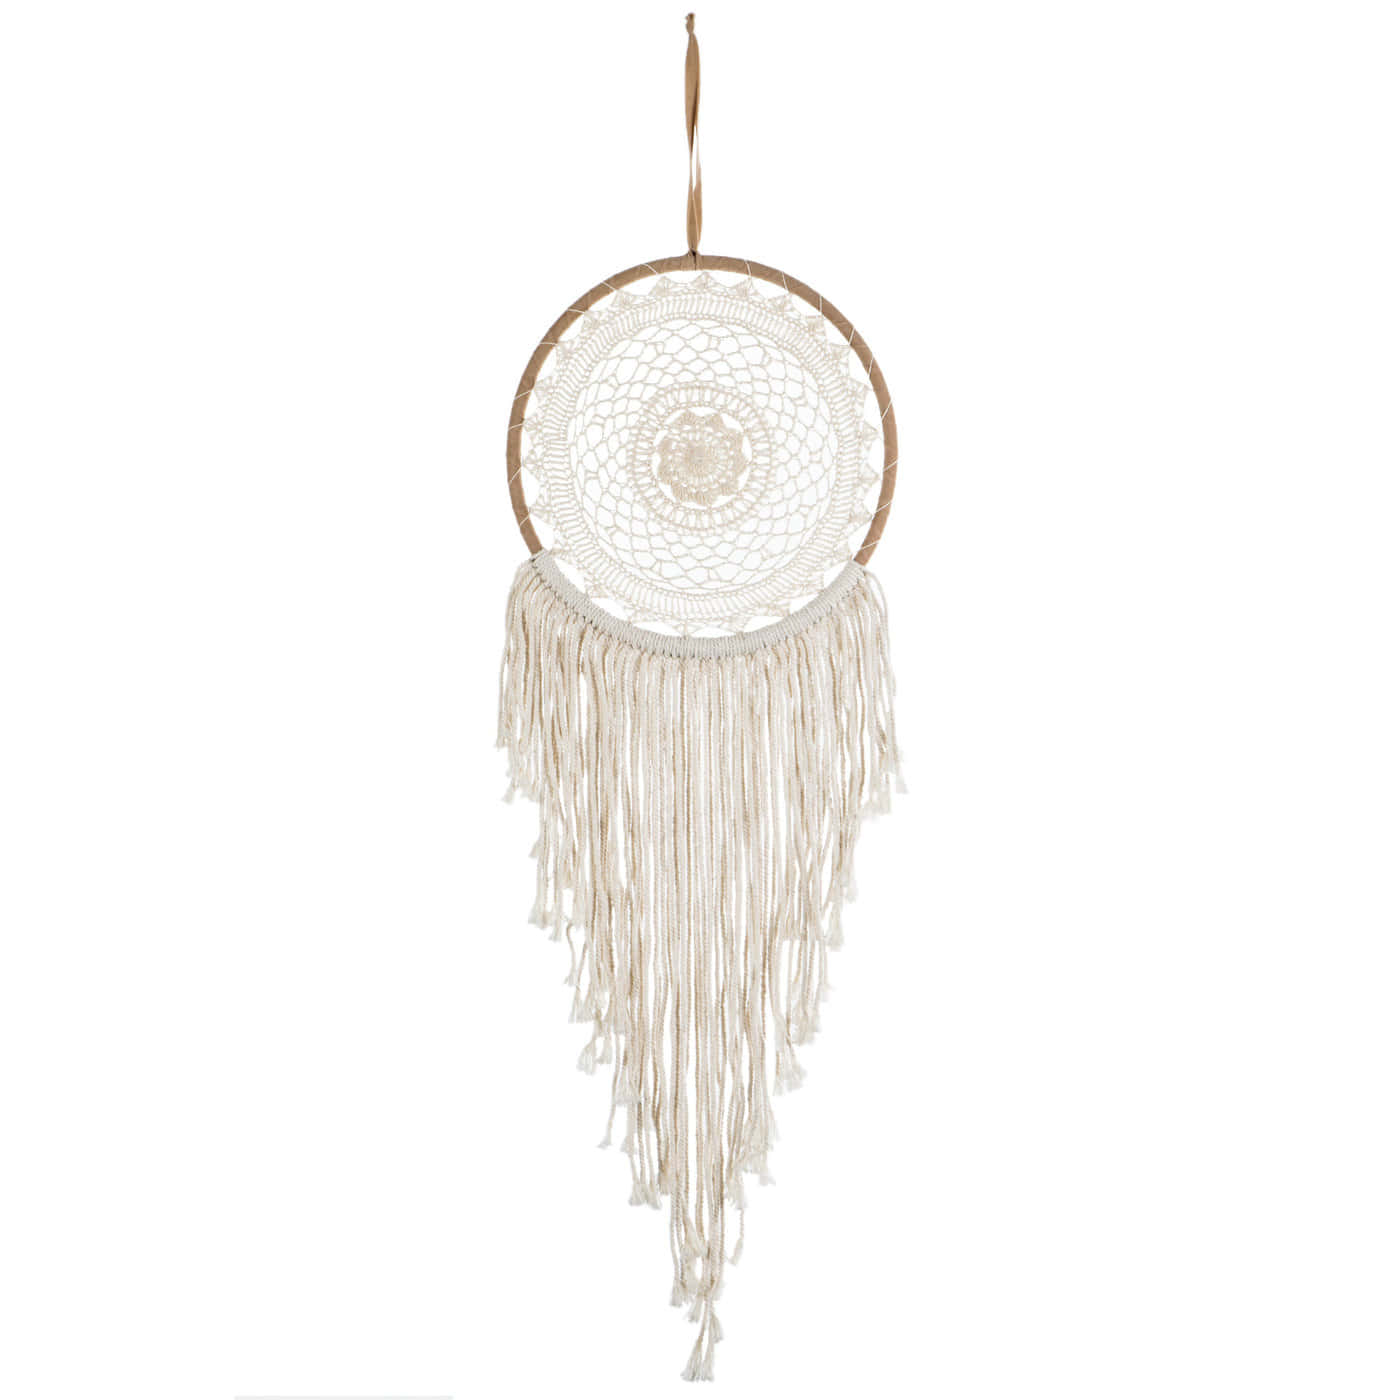 A White Dream Catcher With Fringes Hanging On A White Wall